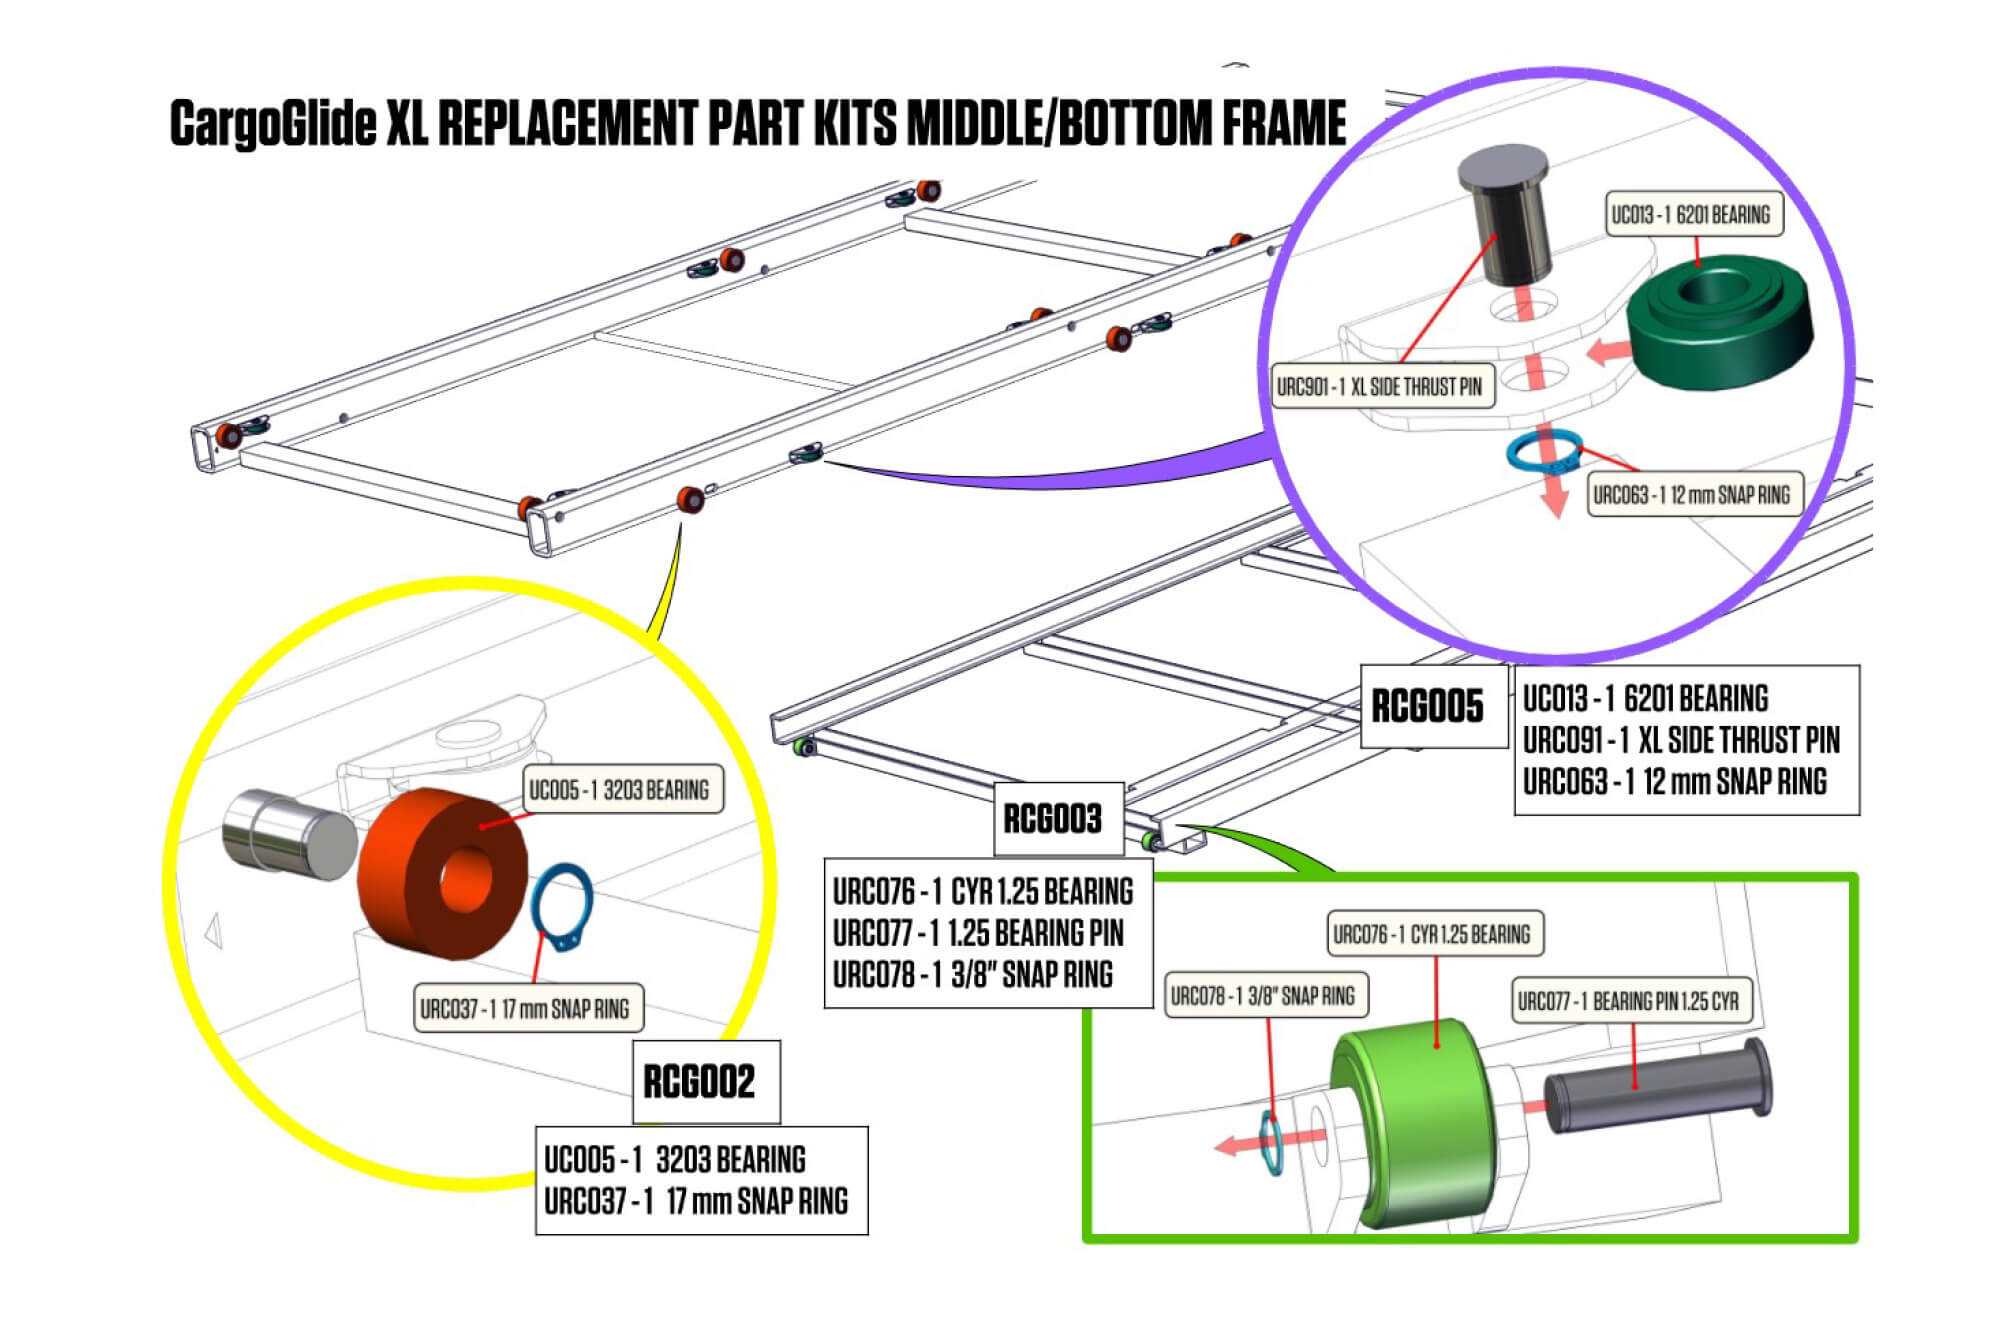 Graphic showing where CargoGlide full extension replacement parts get installed on the bottom frame